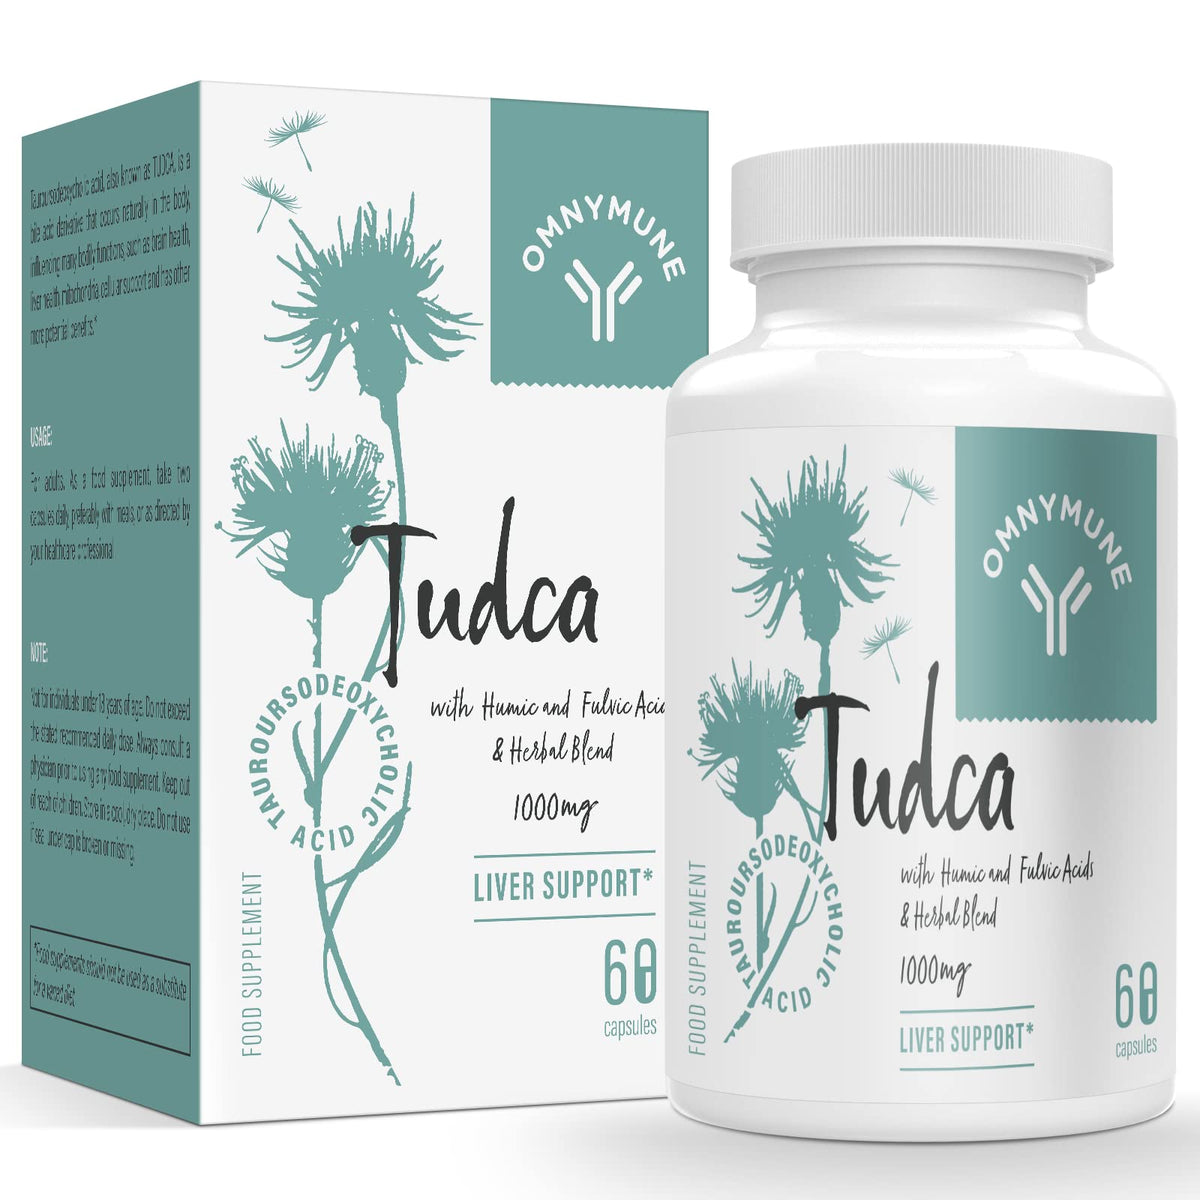 Tudca Liver Support Supplement,Tauroursodeoxycholic Acid Complex 1000mg Per Servings, Bile Salts for Detox Cleanse & Repair,Kidney,Gallbladder,60 Capsules